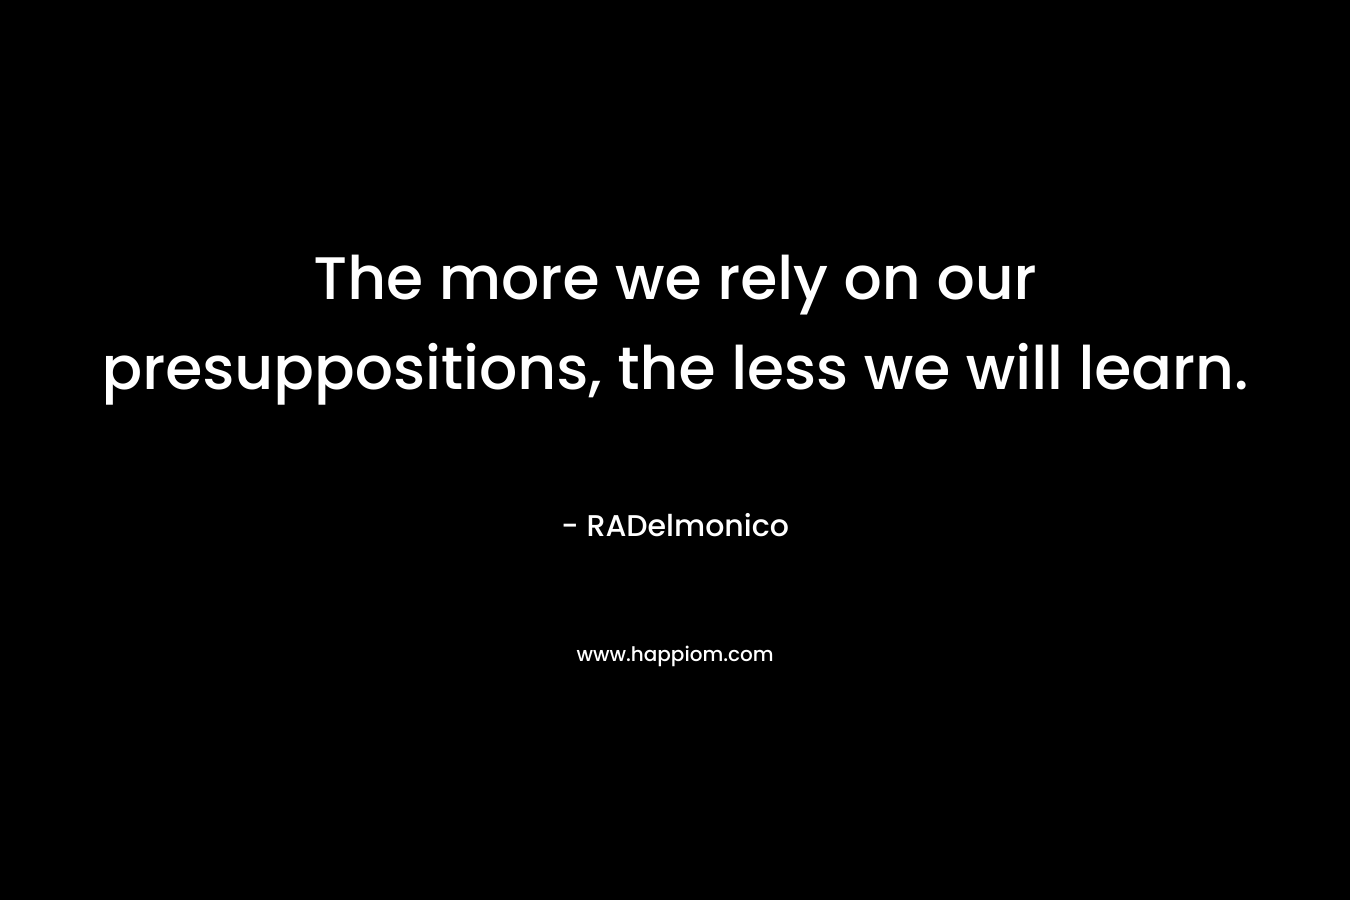 The more we rely on our presuppositions, the less we will learn.